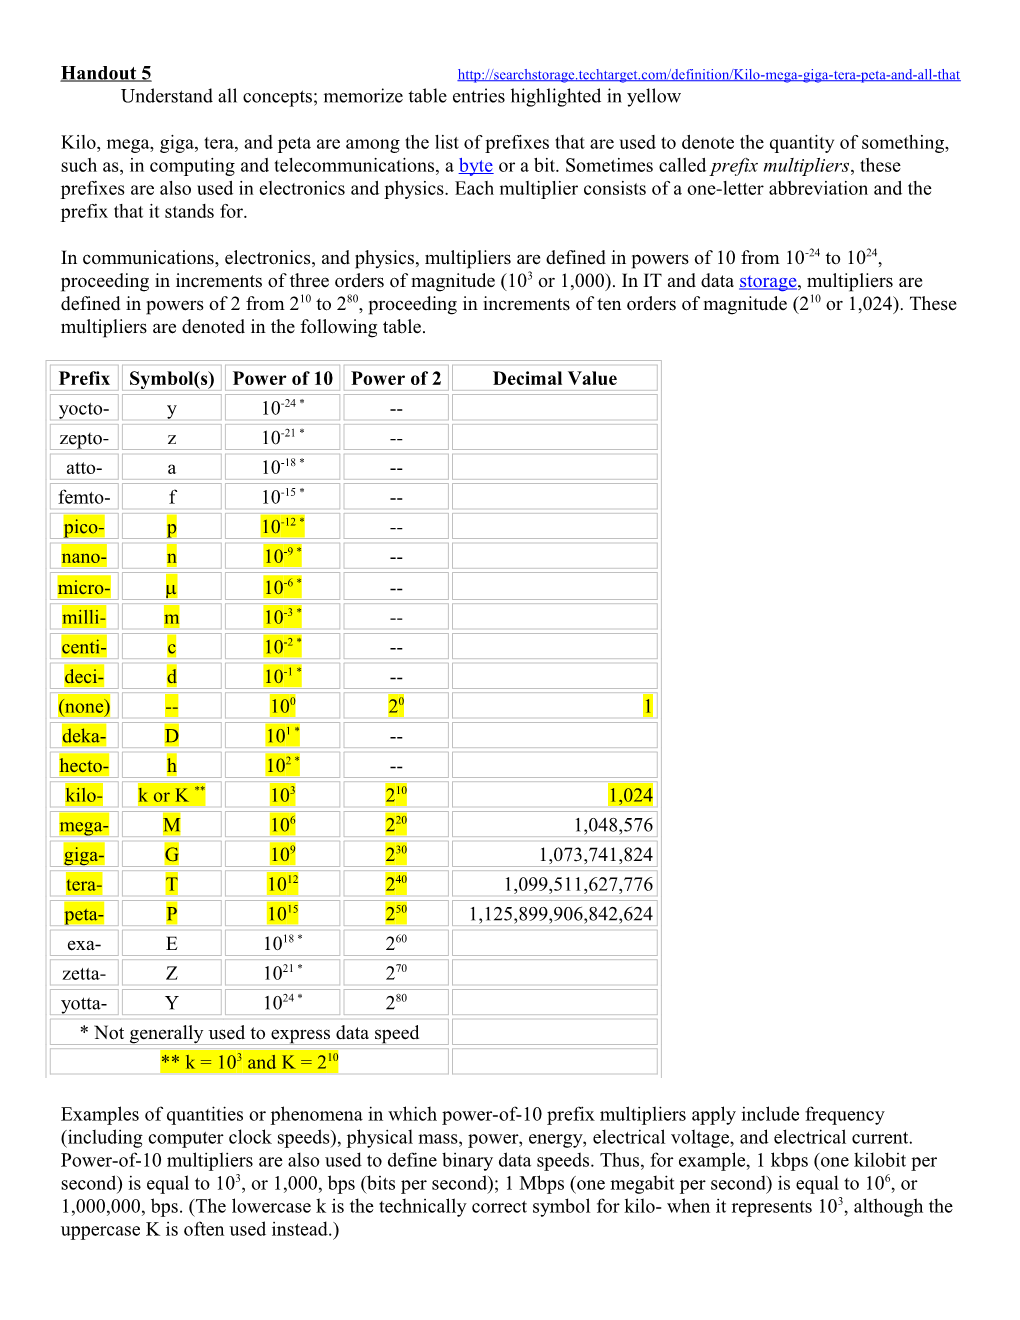 Handout 5 Understand All Concepts; Memorize Table Entries Highlighted in Yellow